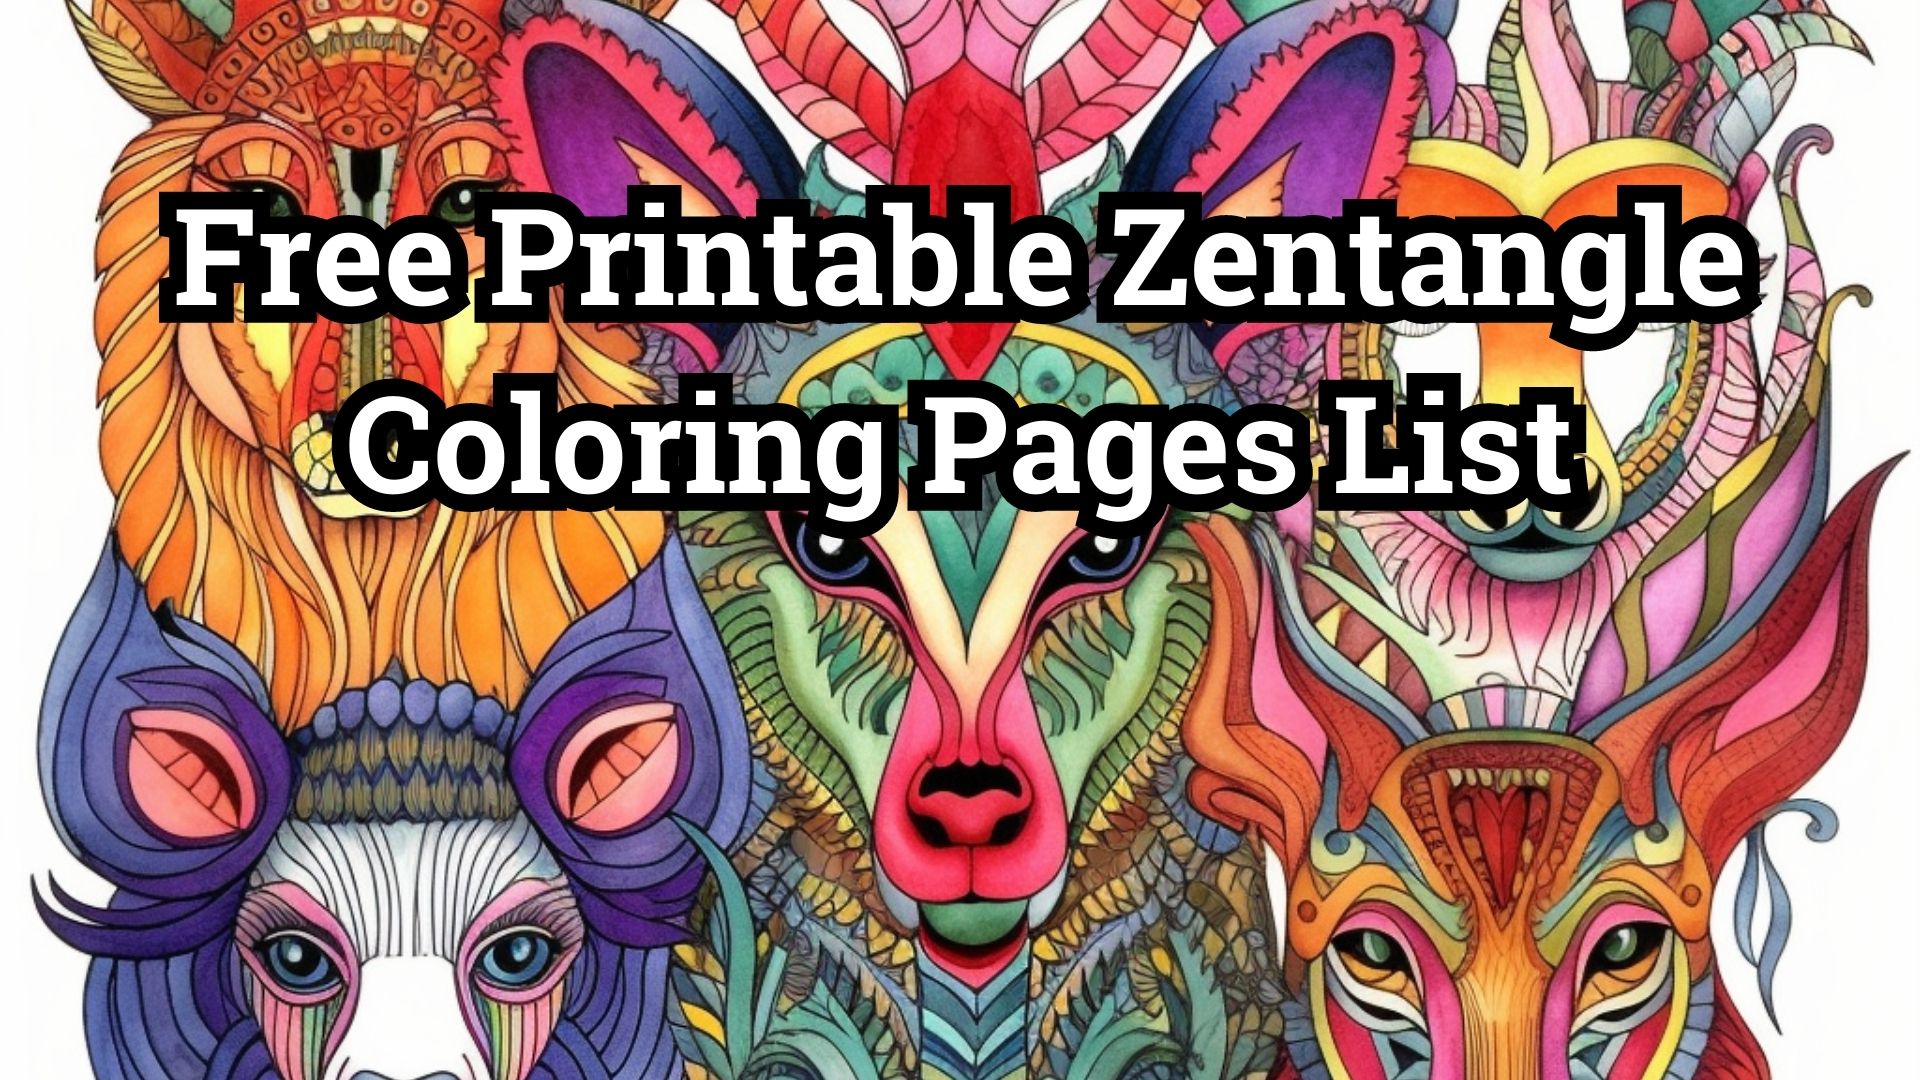 Free Printable Zentangle Coloring Pages List